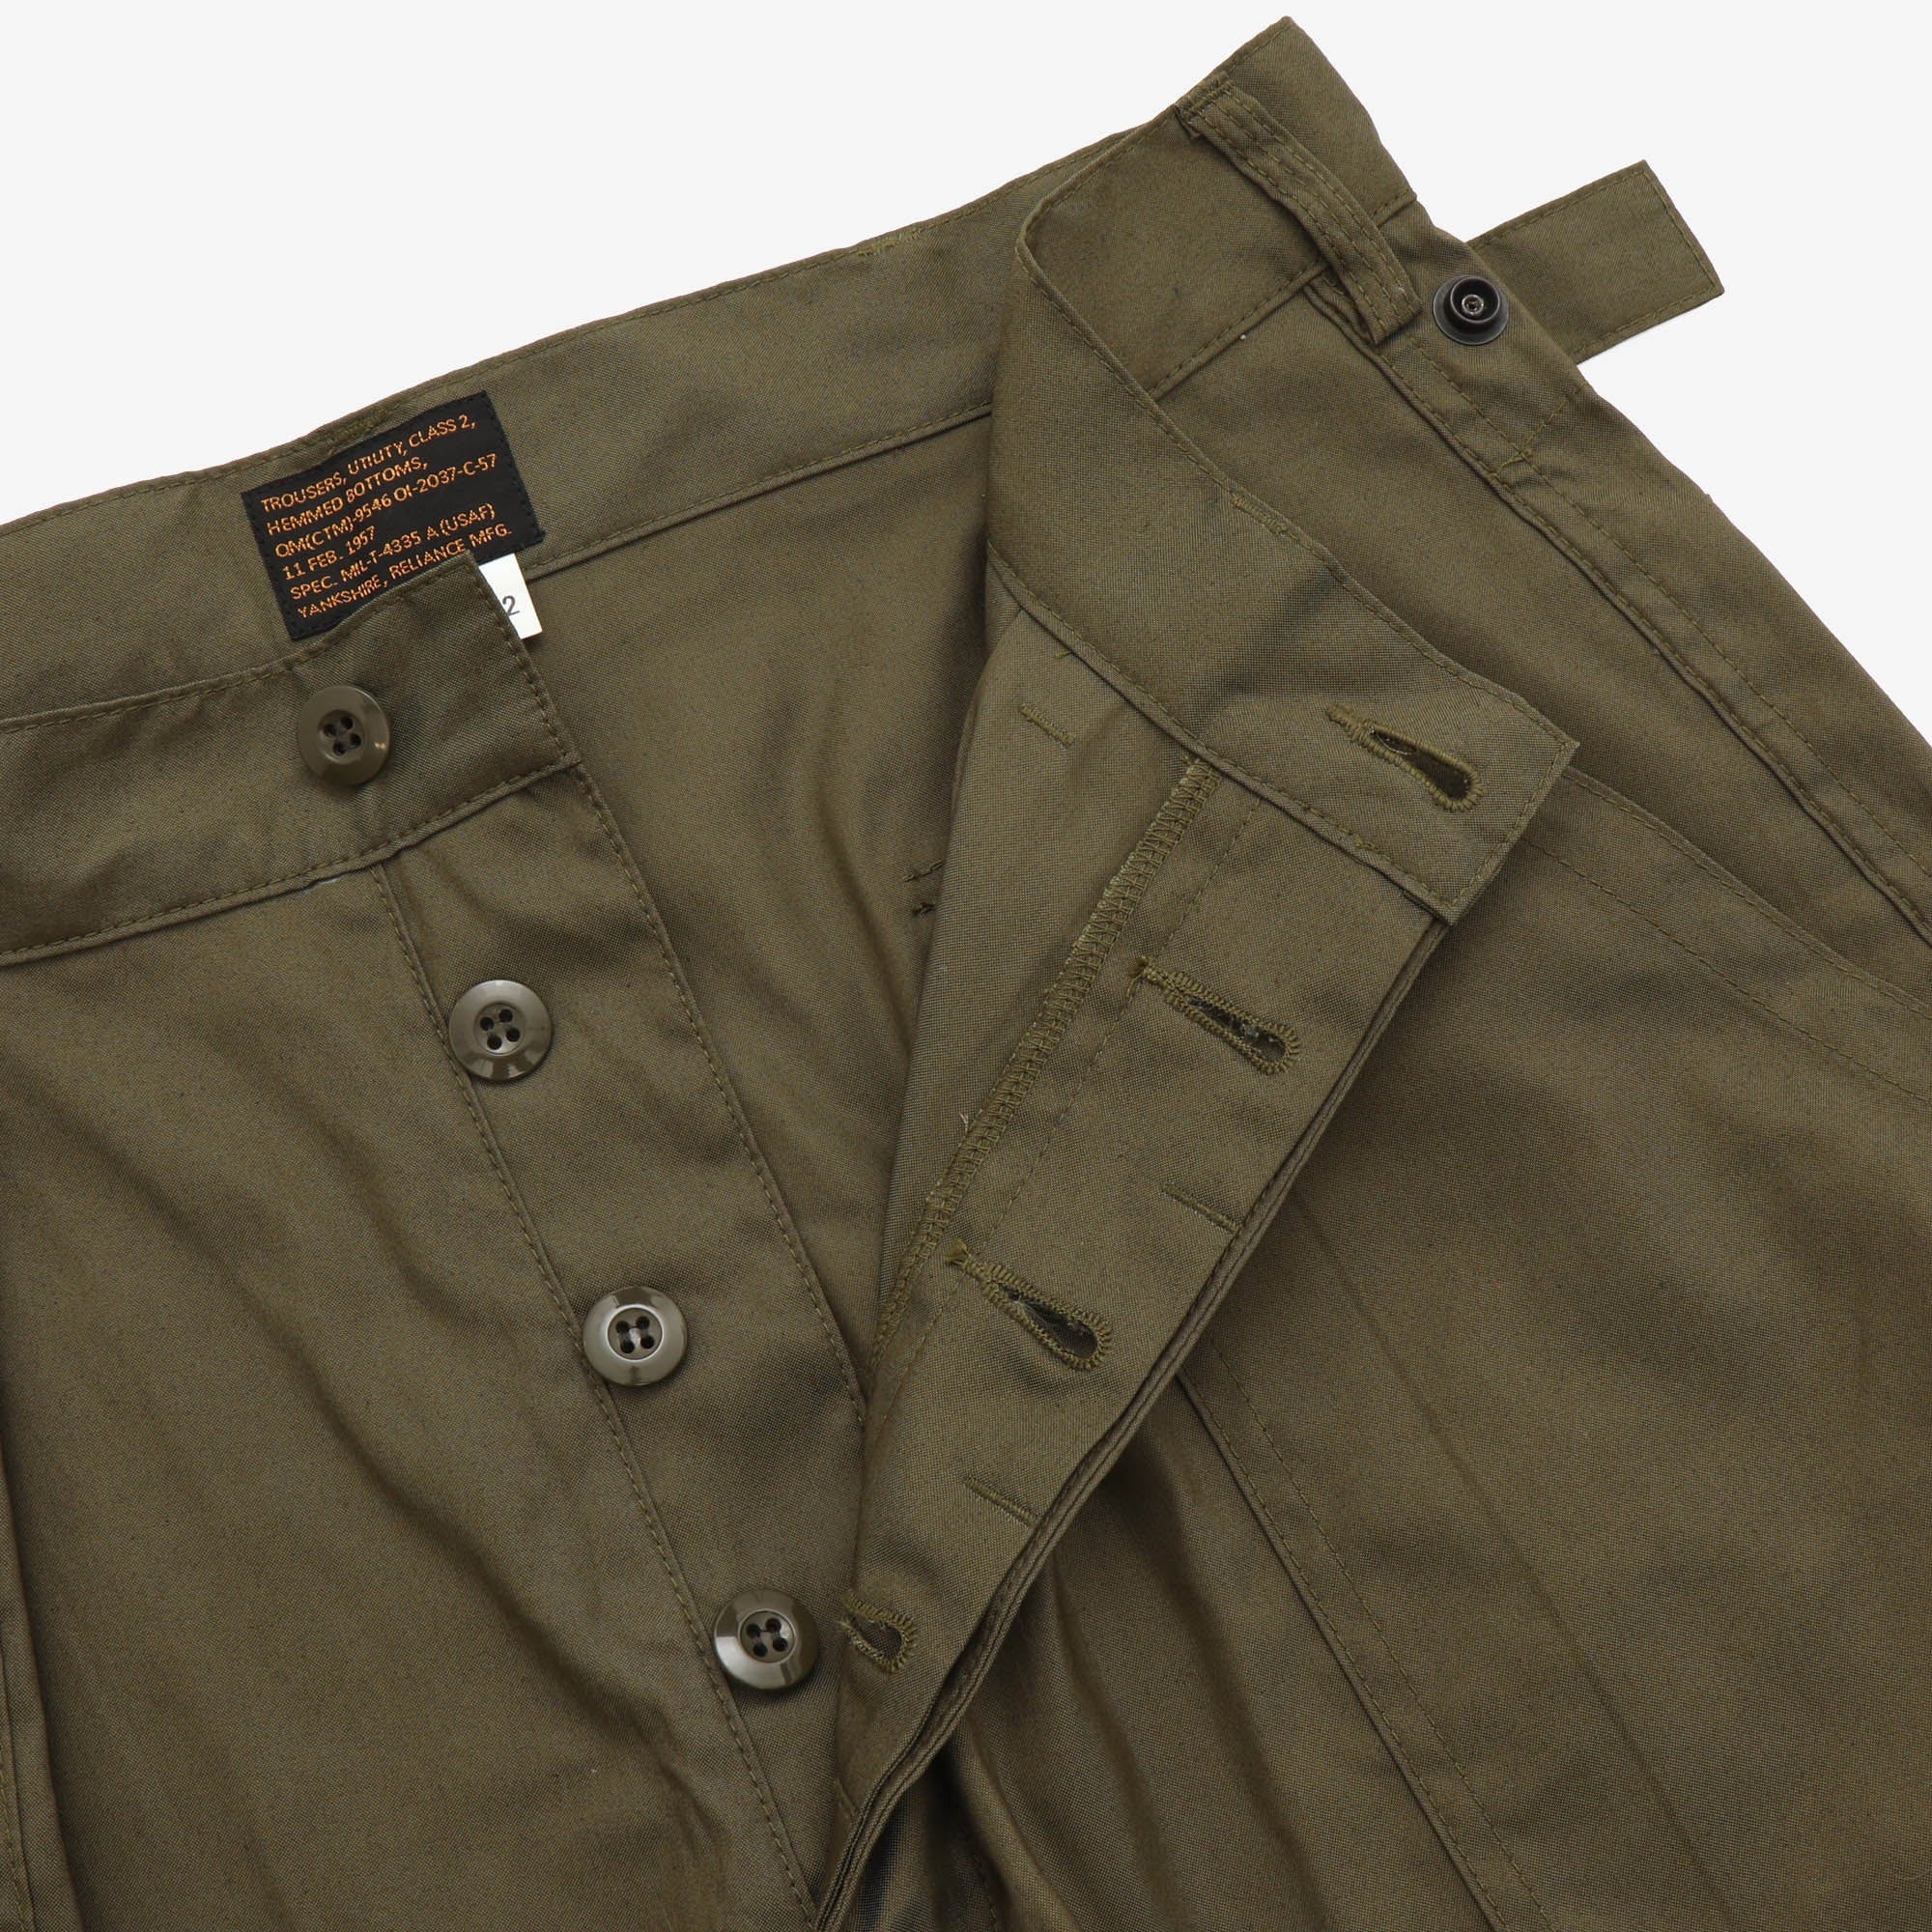 USAF 1957 Trousers